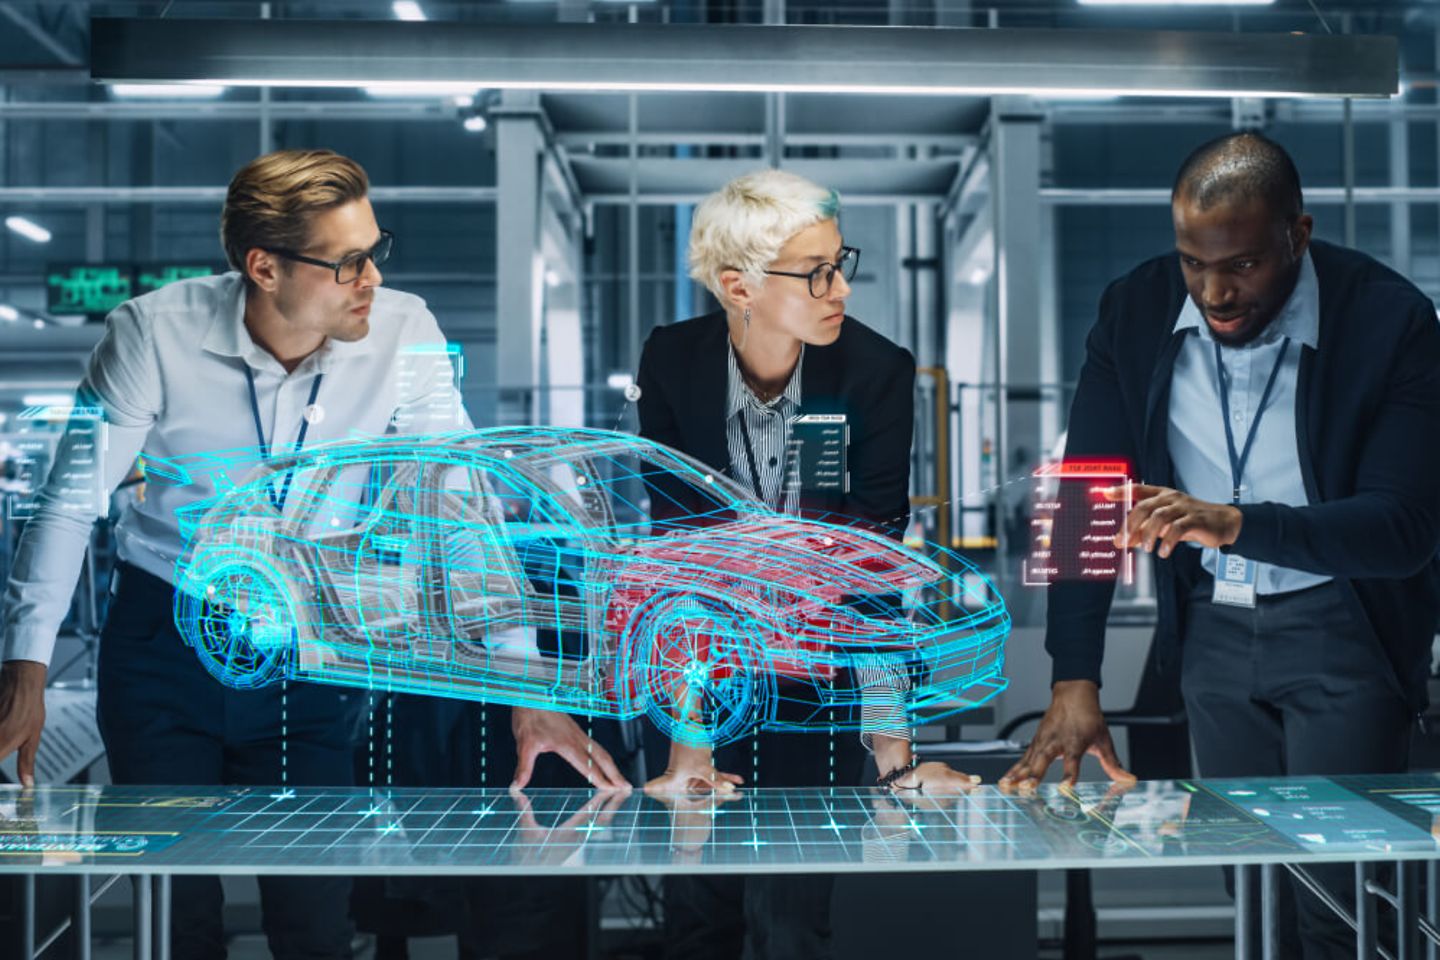 Industrial designers viewing the holographic model of a car